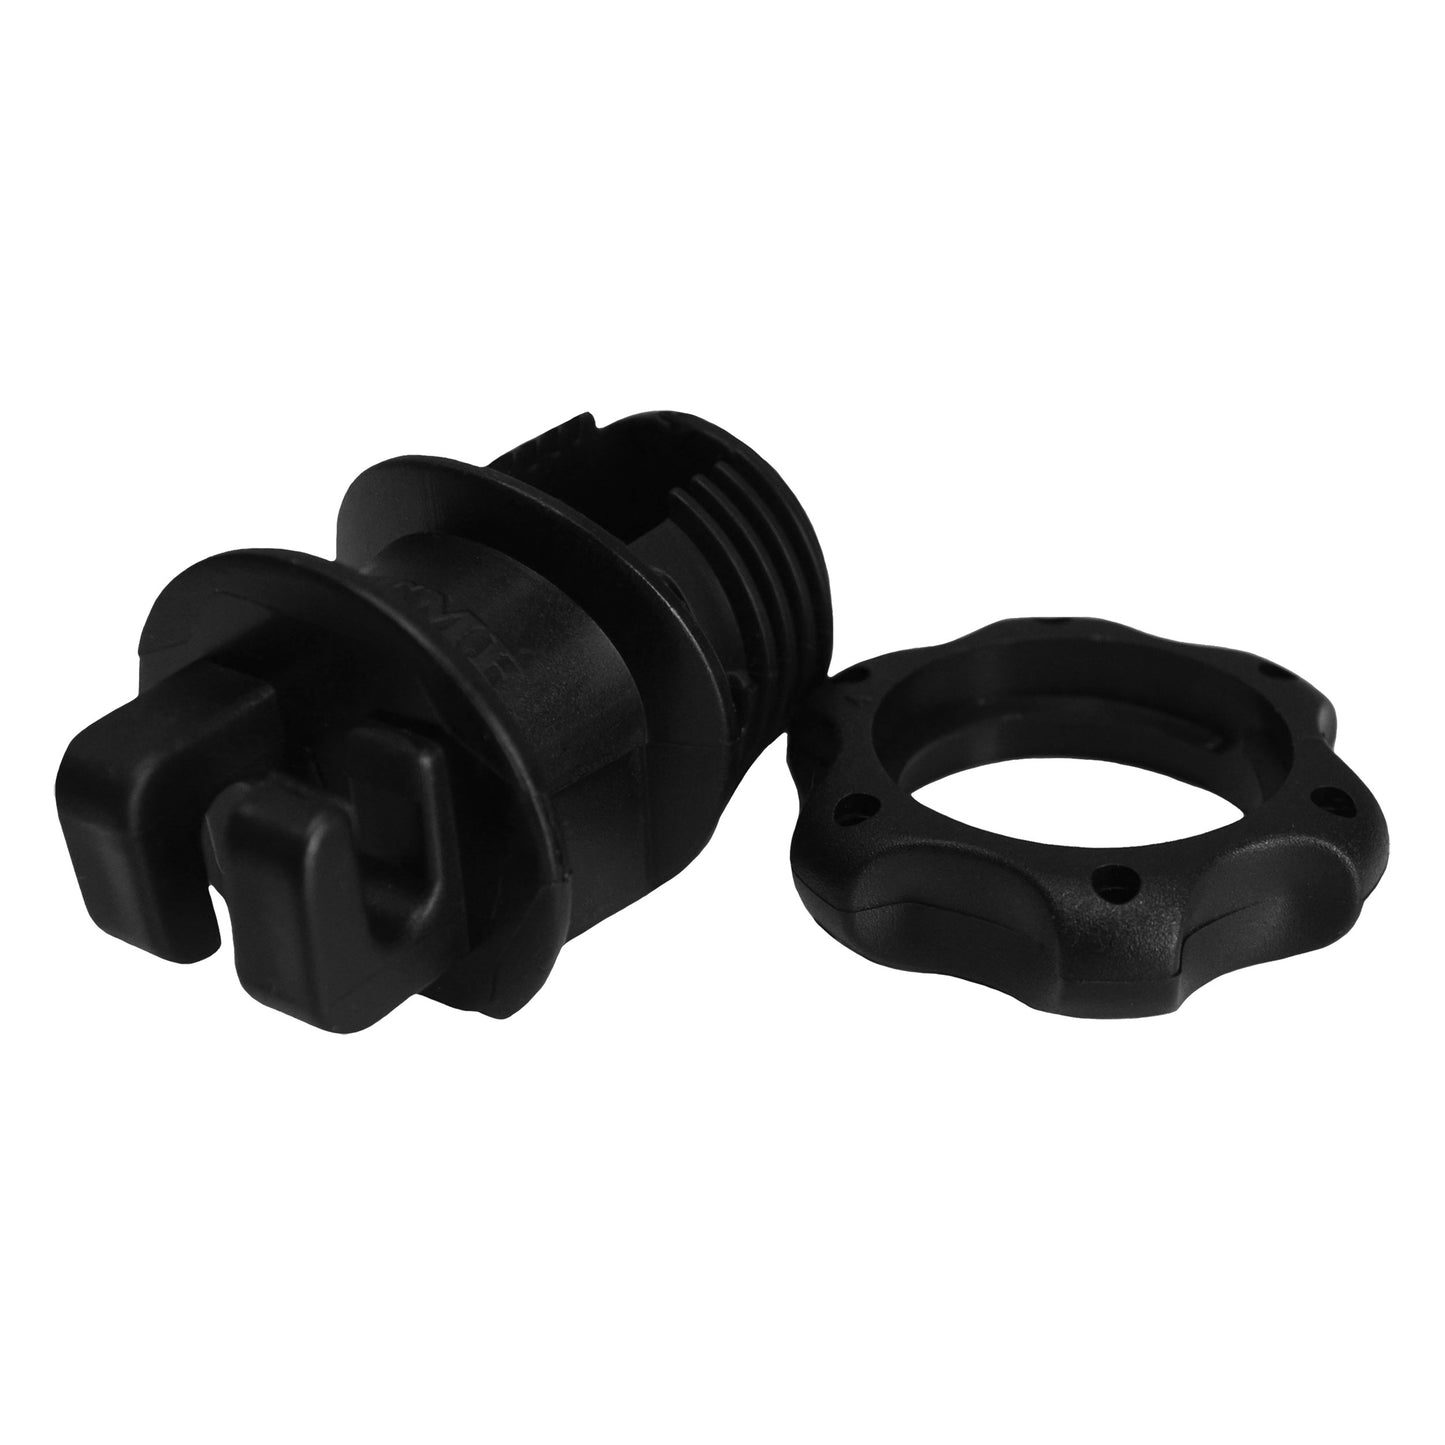 Adjustable Insulator for wire and tape (50 pcs.)